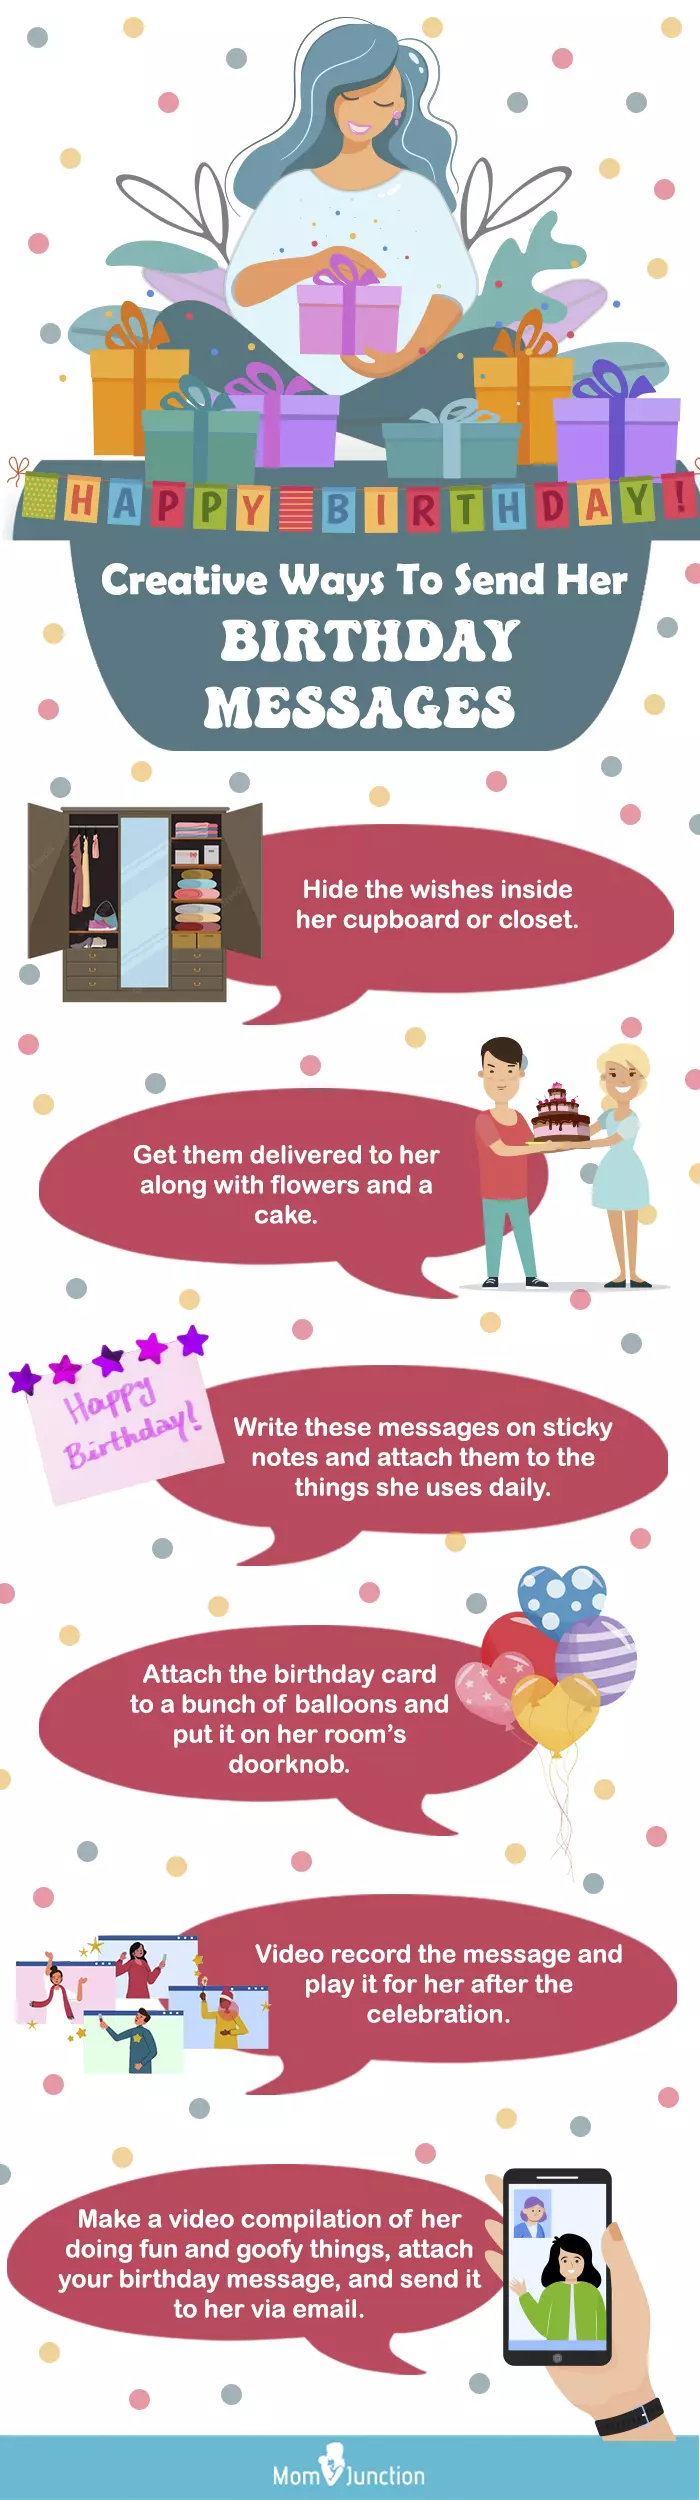 ways to send her birthday messages (infographic)